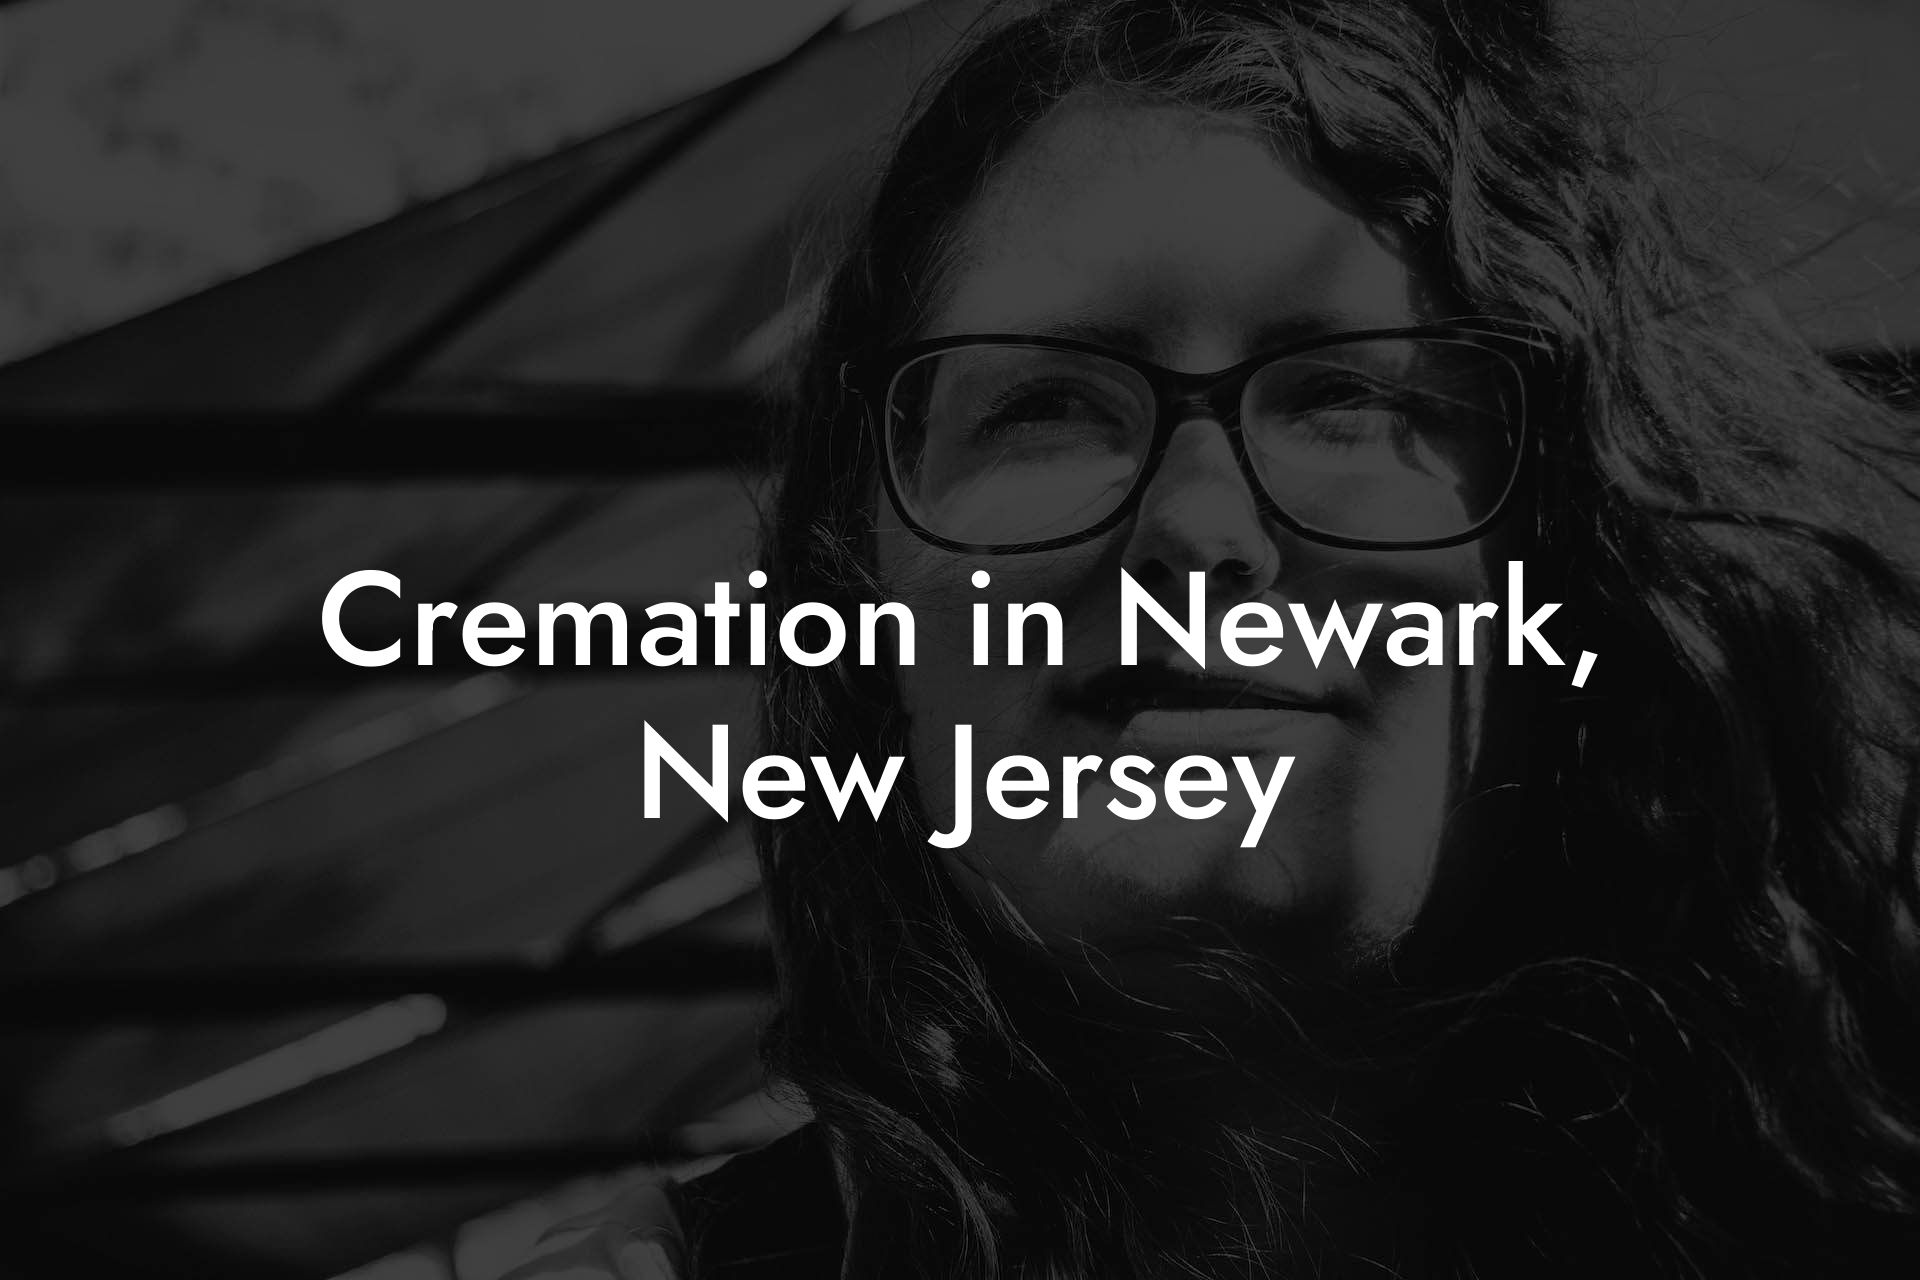 Cremation in Newark, New Jersey